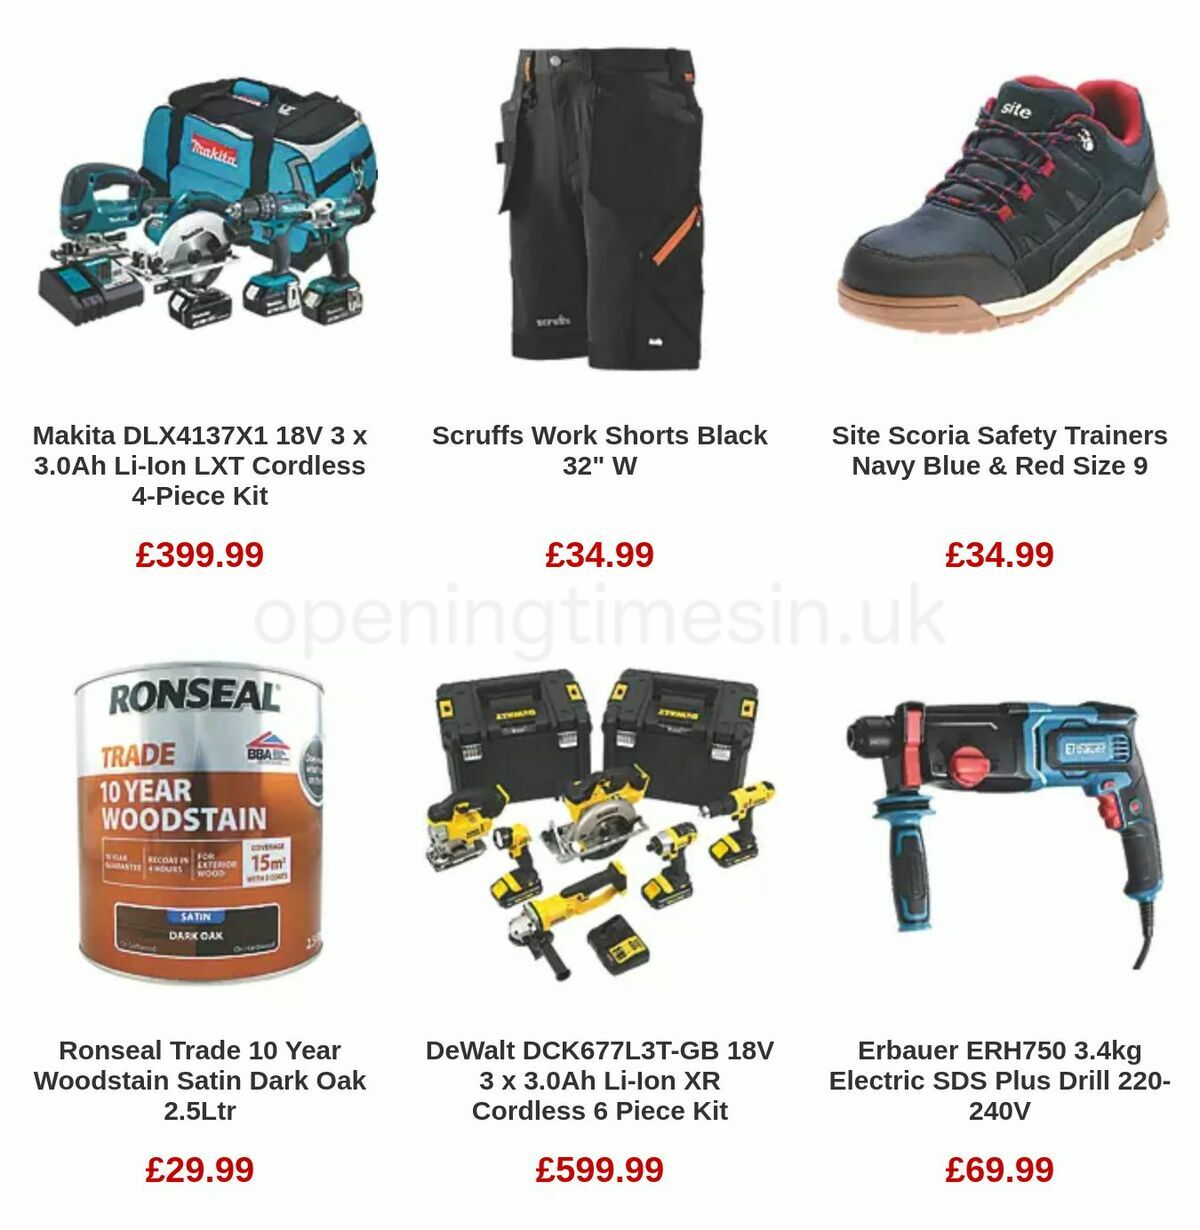 Screwfix Offers from 7 June